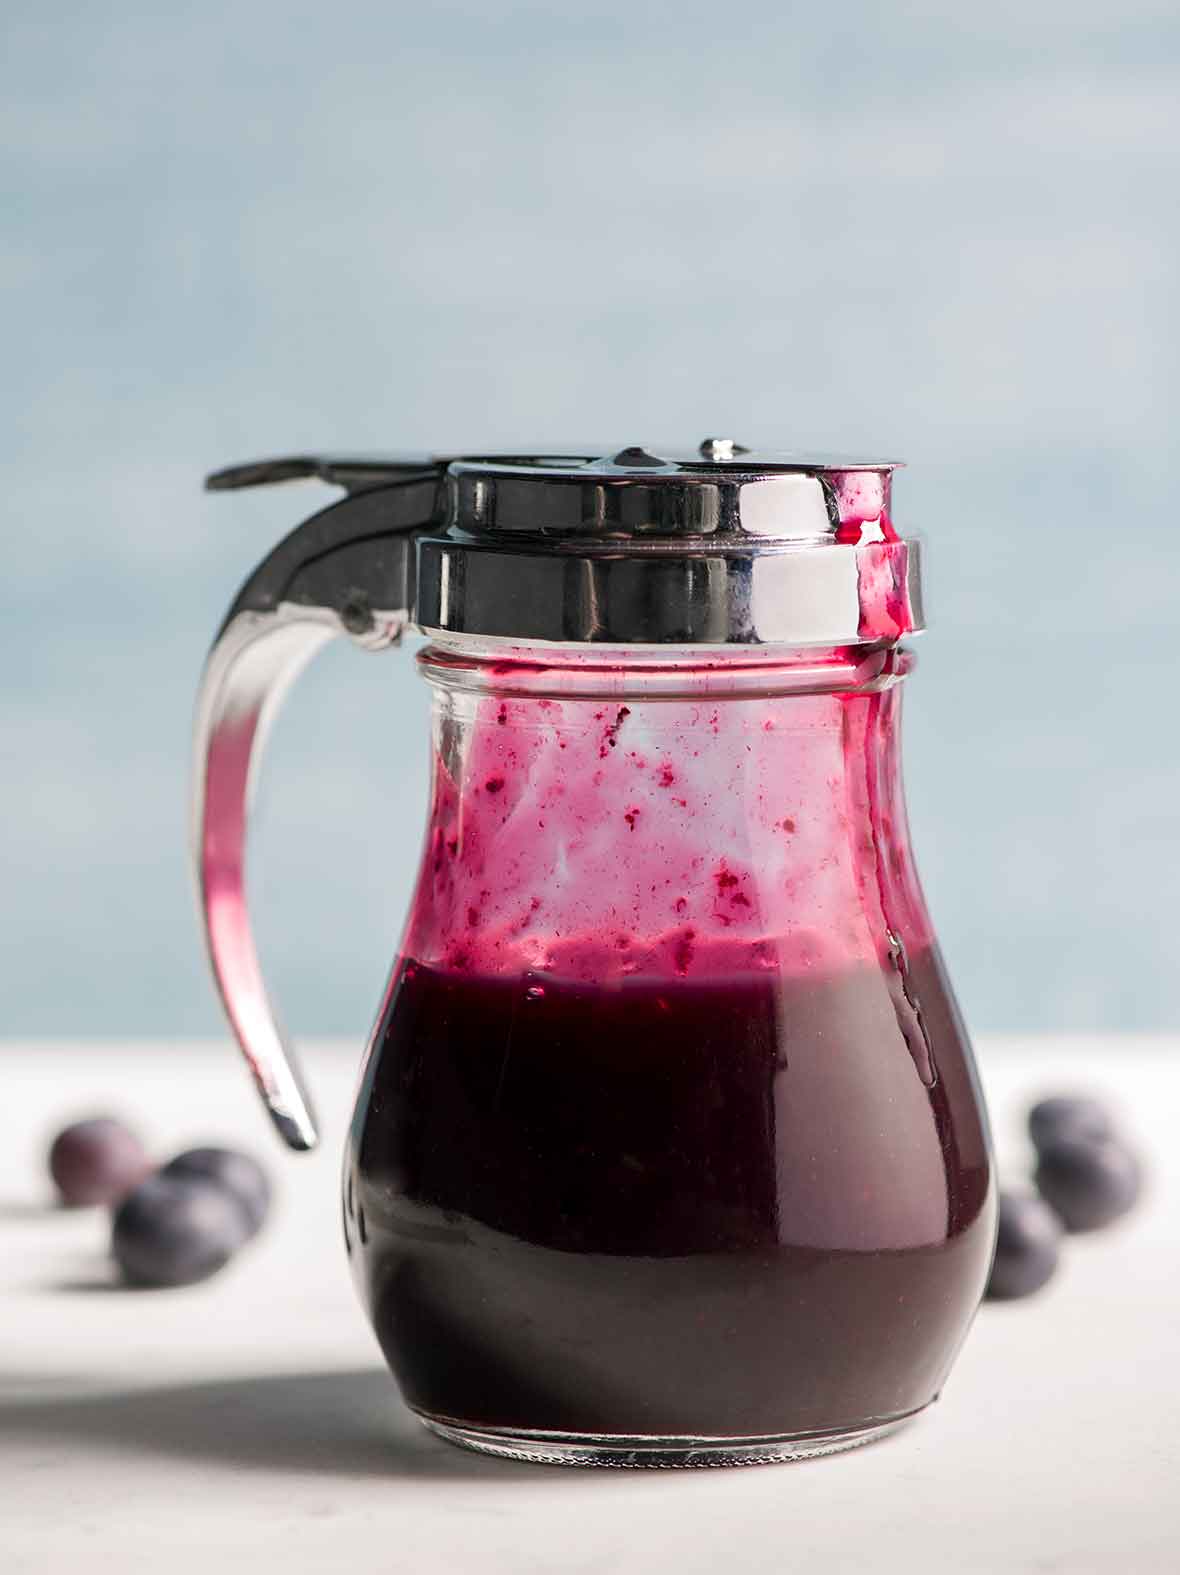 A diner-style dispenser half-filled with blueberry syrup.